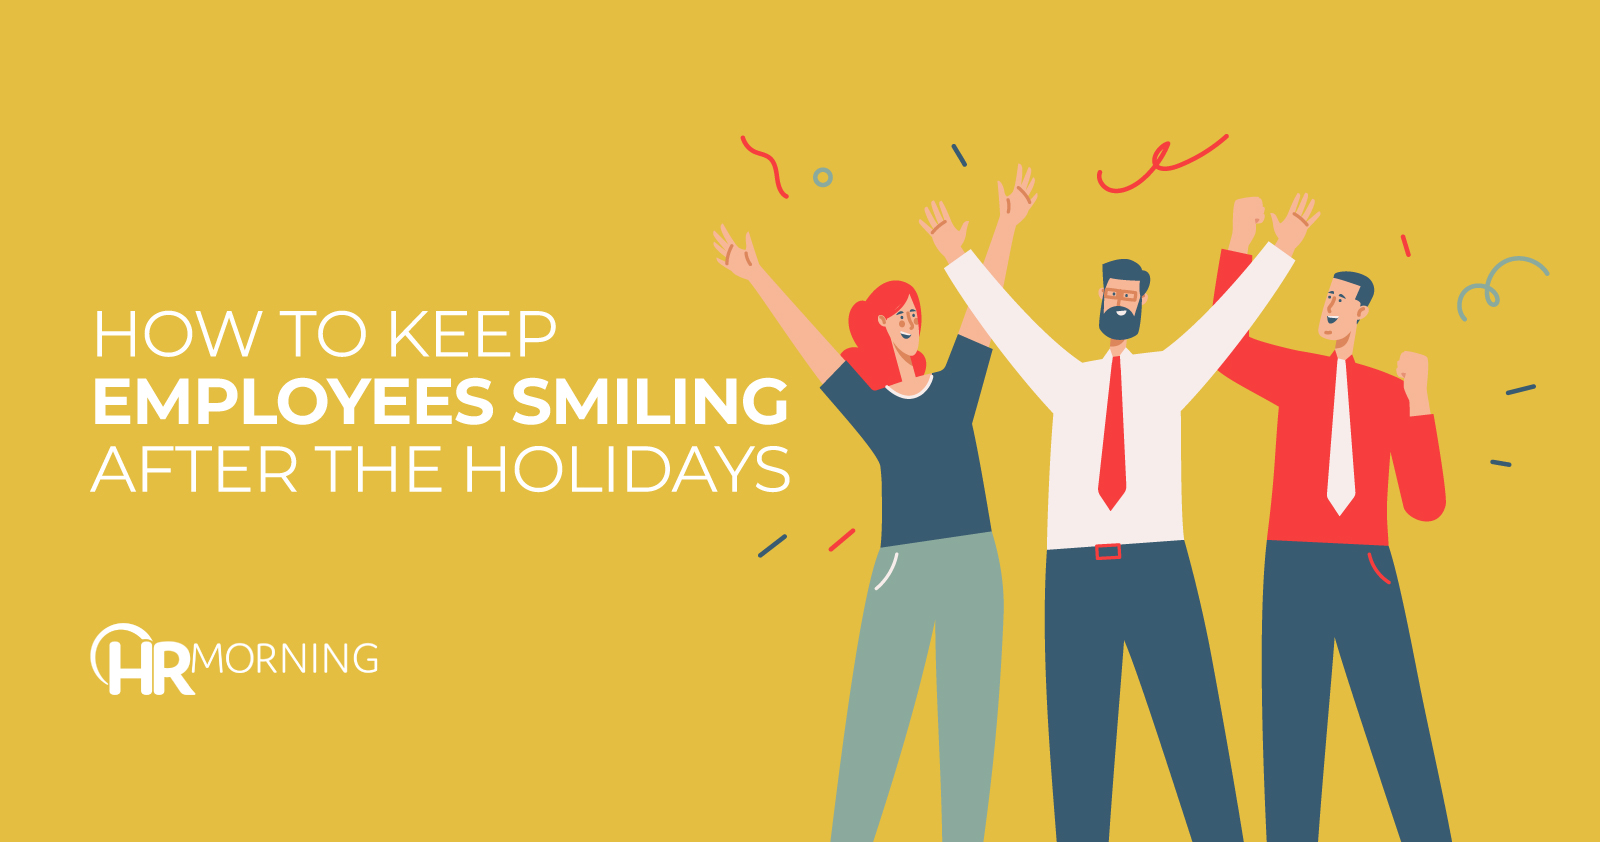 How To Keep Employees Smiling After The Holidays